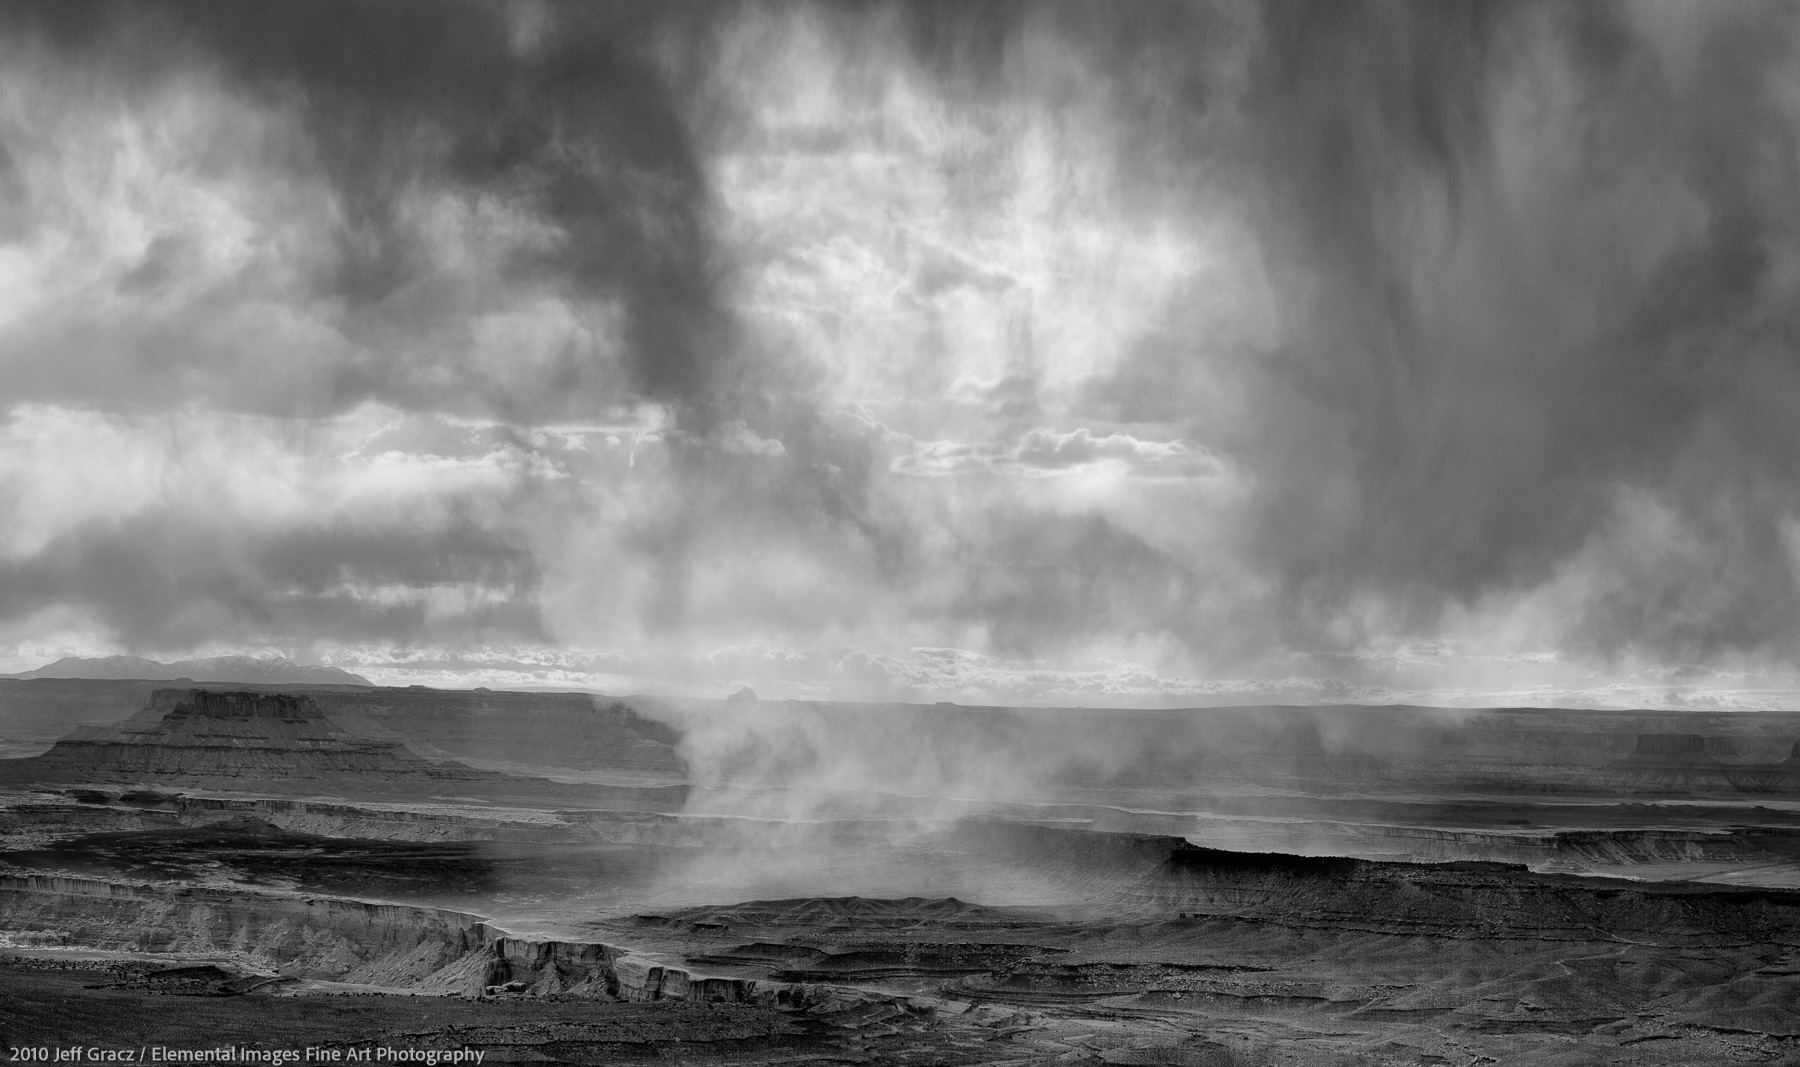 Snow Shower over Canyonlands | Canyonlands National Park | UT | USA - © 2010 Jeff Gracz / Elemental Images Fine Art Photography - All Rights Reserved Worldwide